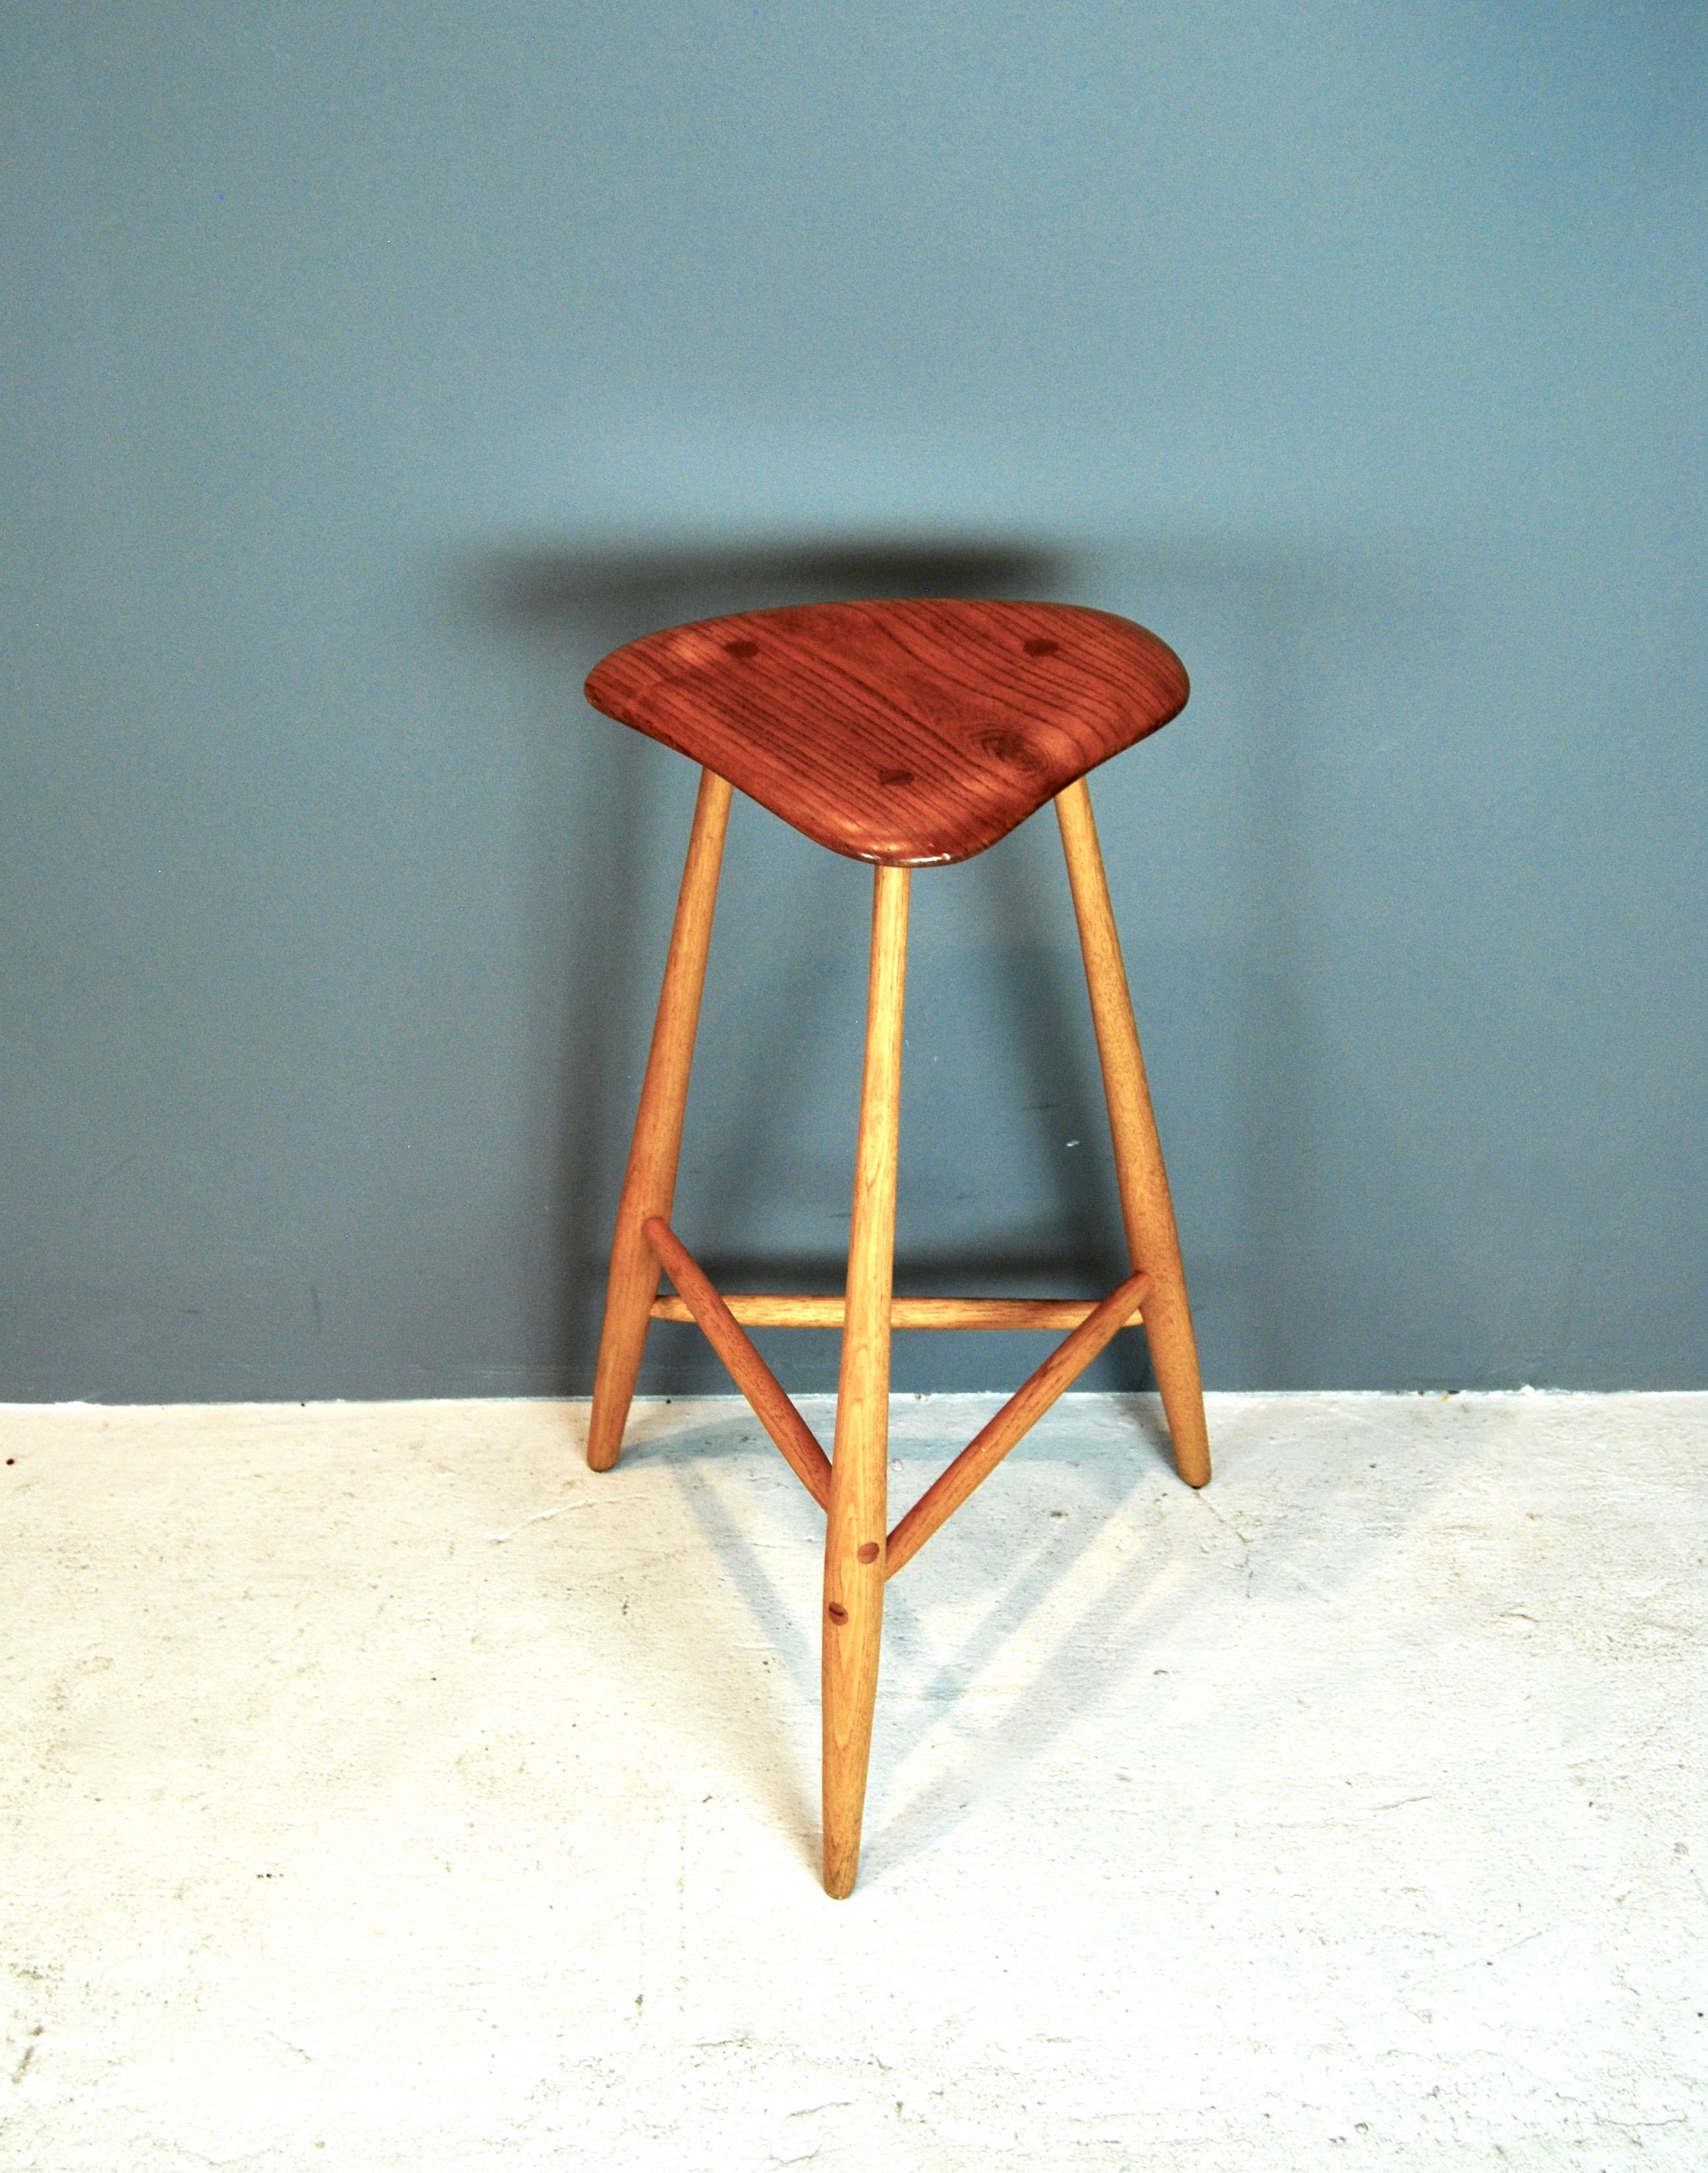 Rare, hand sculpted tall stool by one of the most important American studio woodworkers Wharton Esherick. This example is made of hickory and oak species with a beautiful freeform shaped seat and long tapered legs.
There are no breaks or repairs to